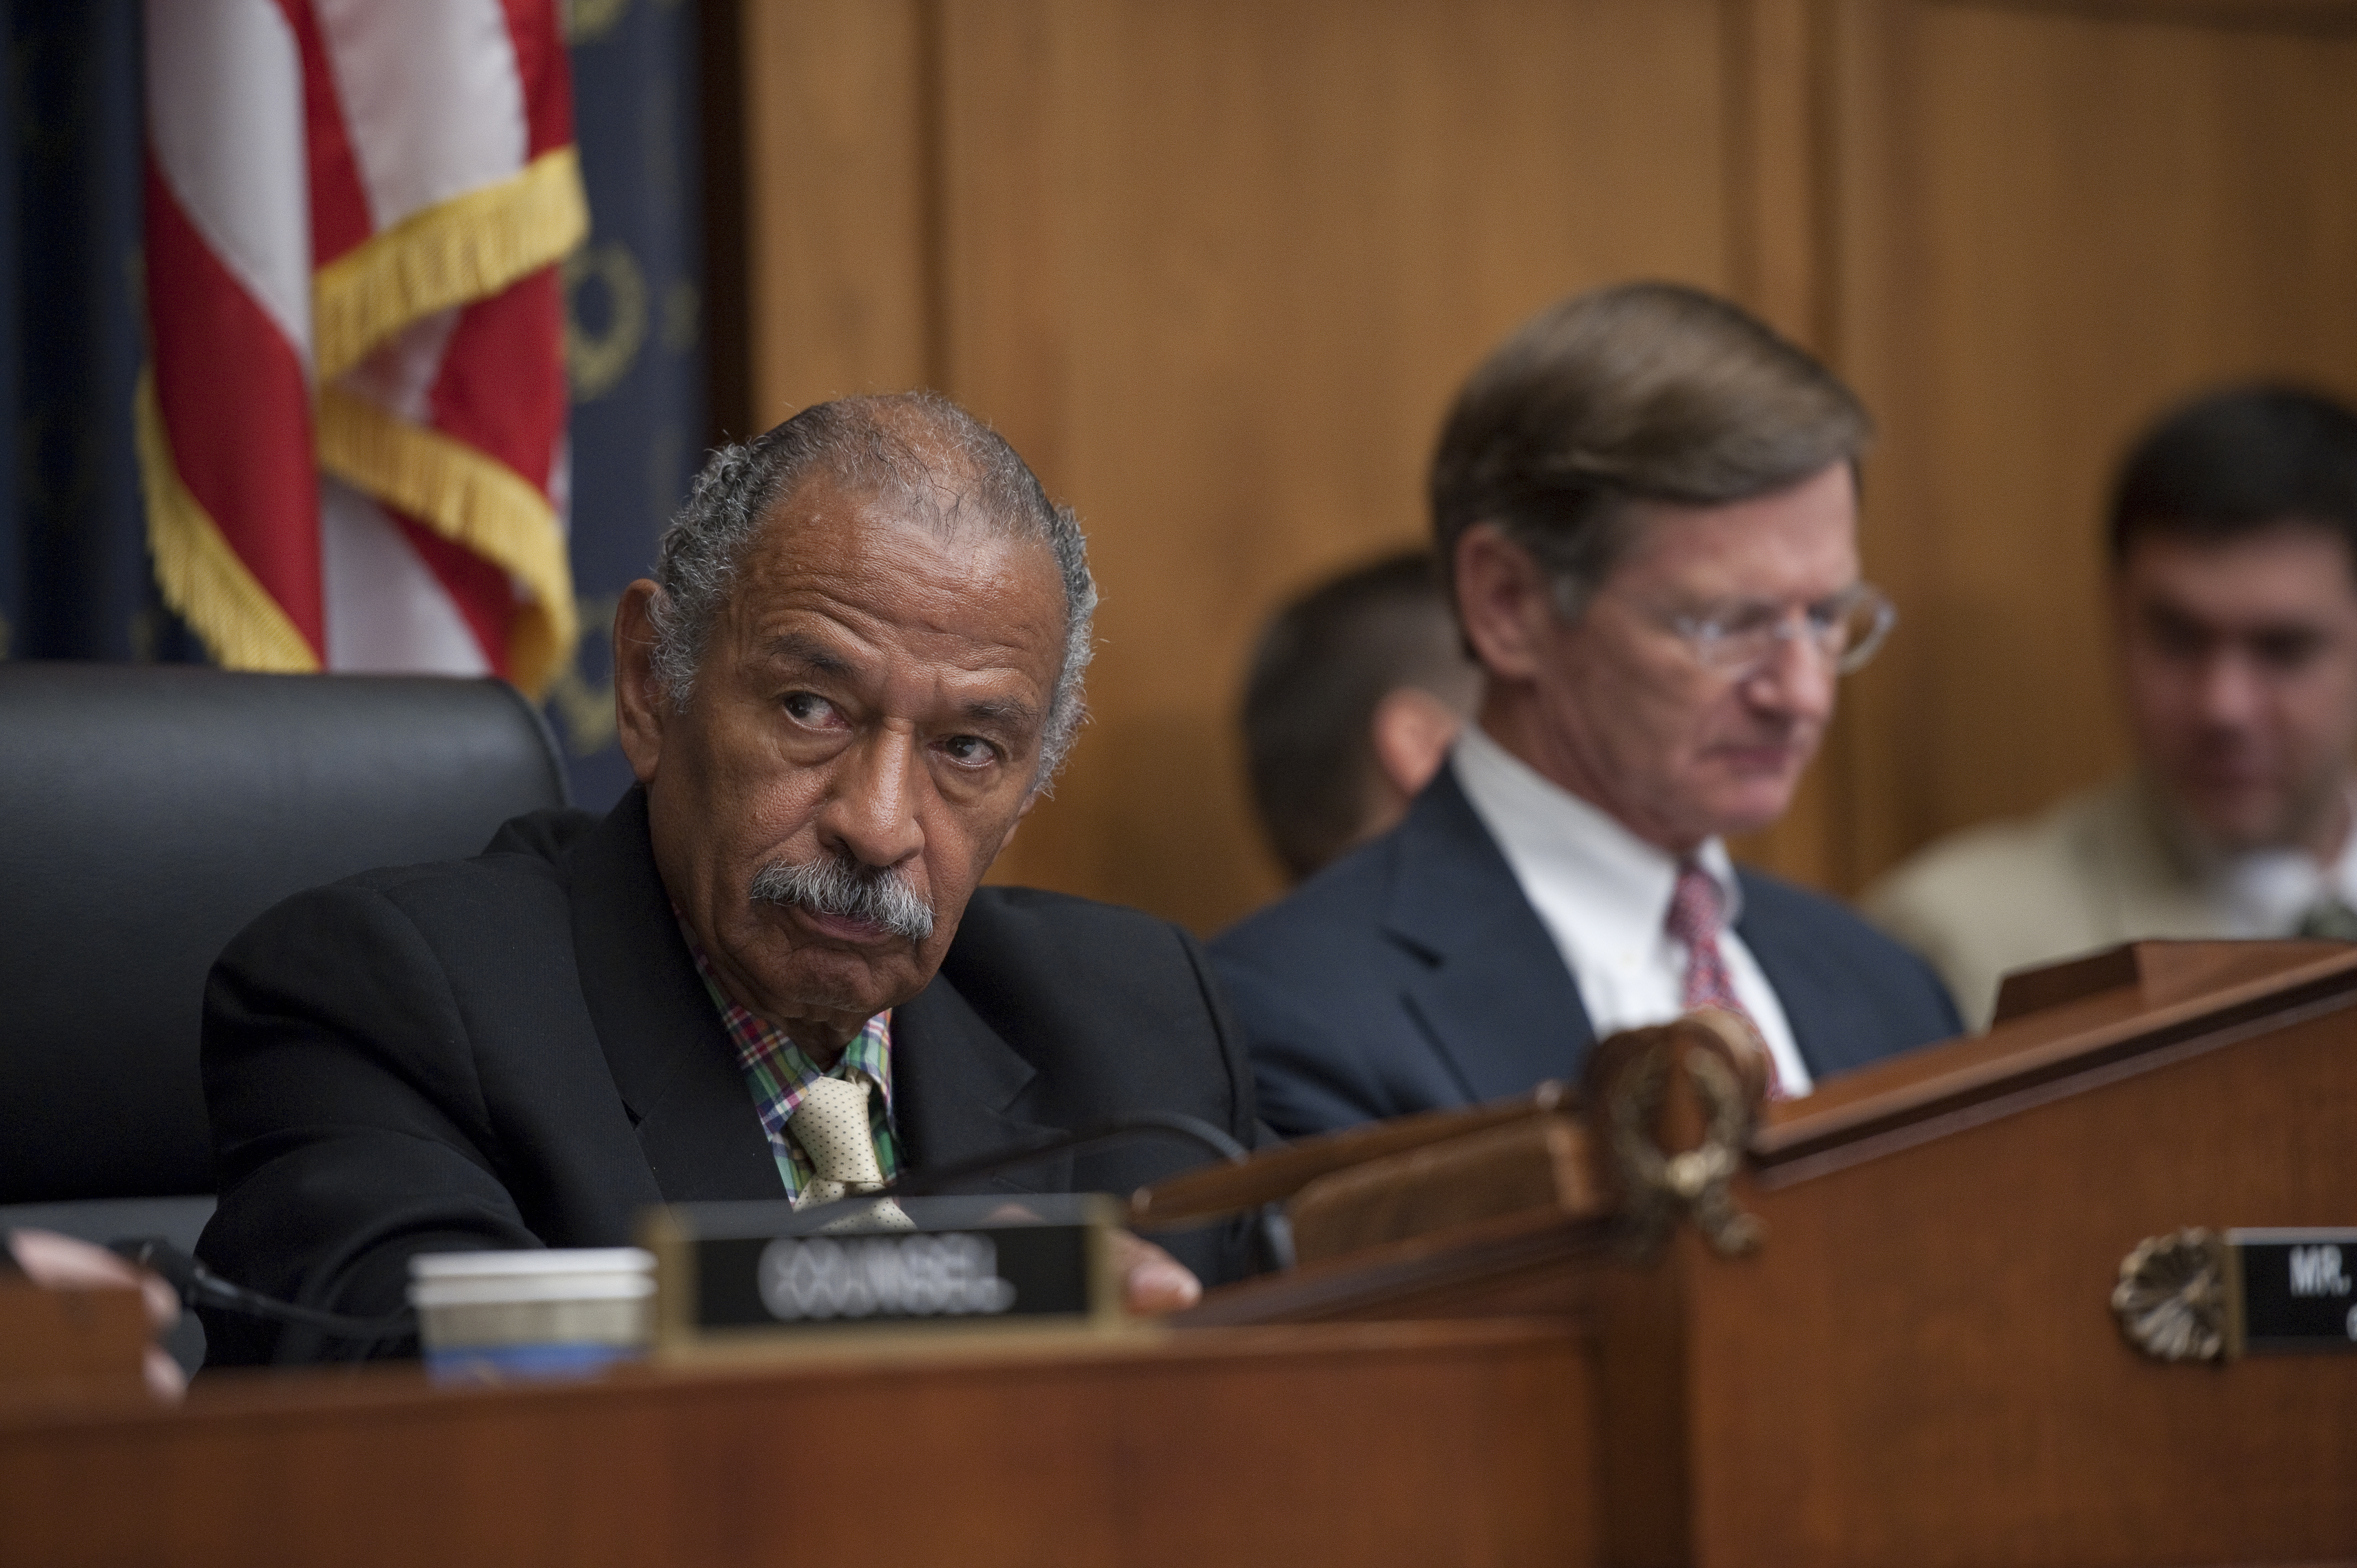 Rep. John Conyers (D-MI.) at a BP Oil Spill Victim Compensation committee hearing in Washington on July 21, 2010. (Douglas Graham&mdash;CQ-Roll Call,Inc.)